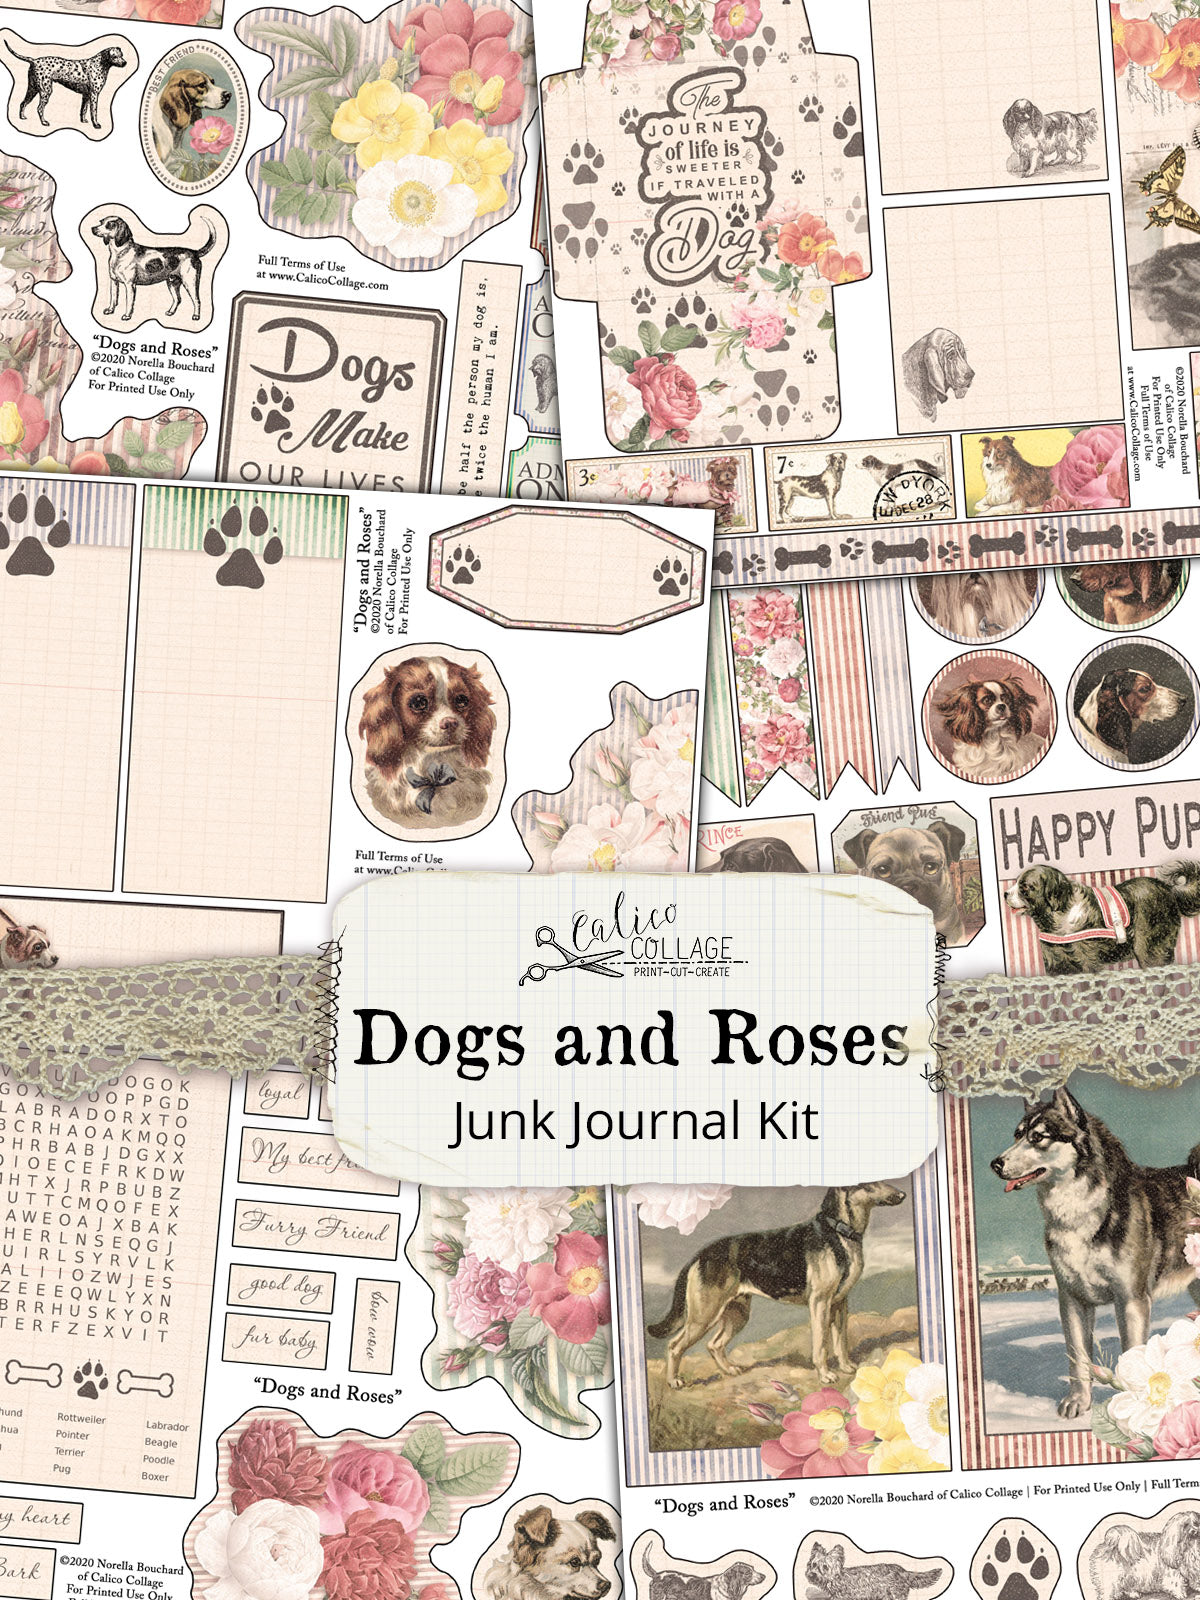 One Fine Day Printable Junk Journal Kit